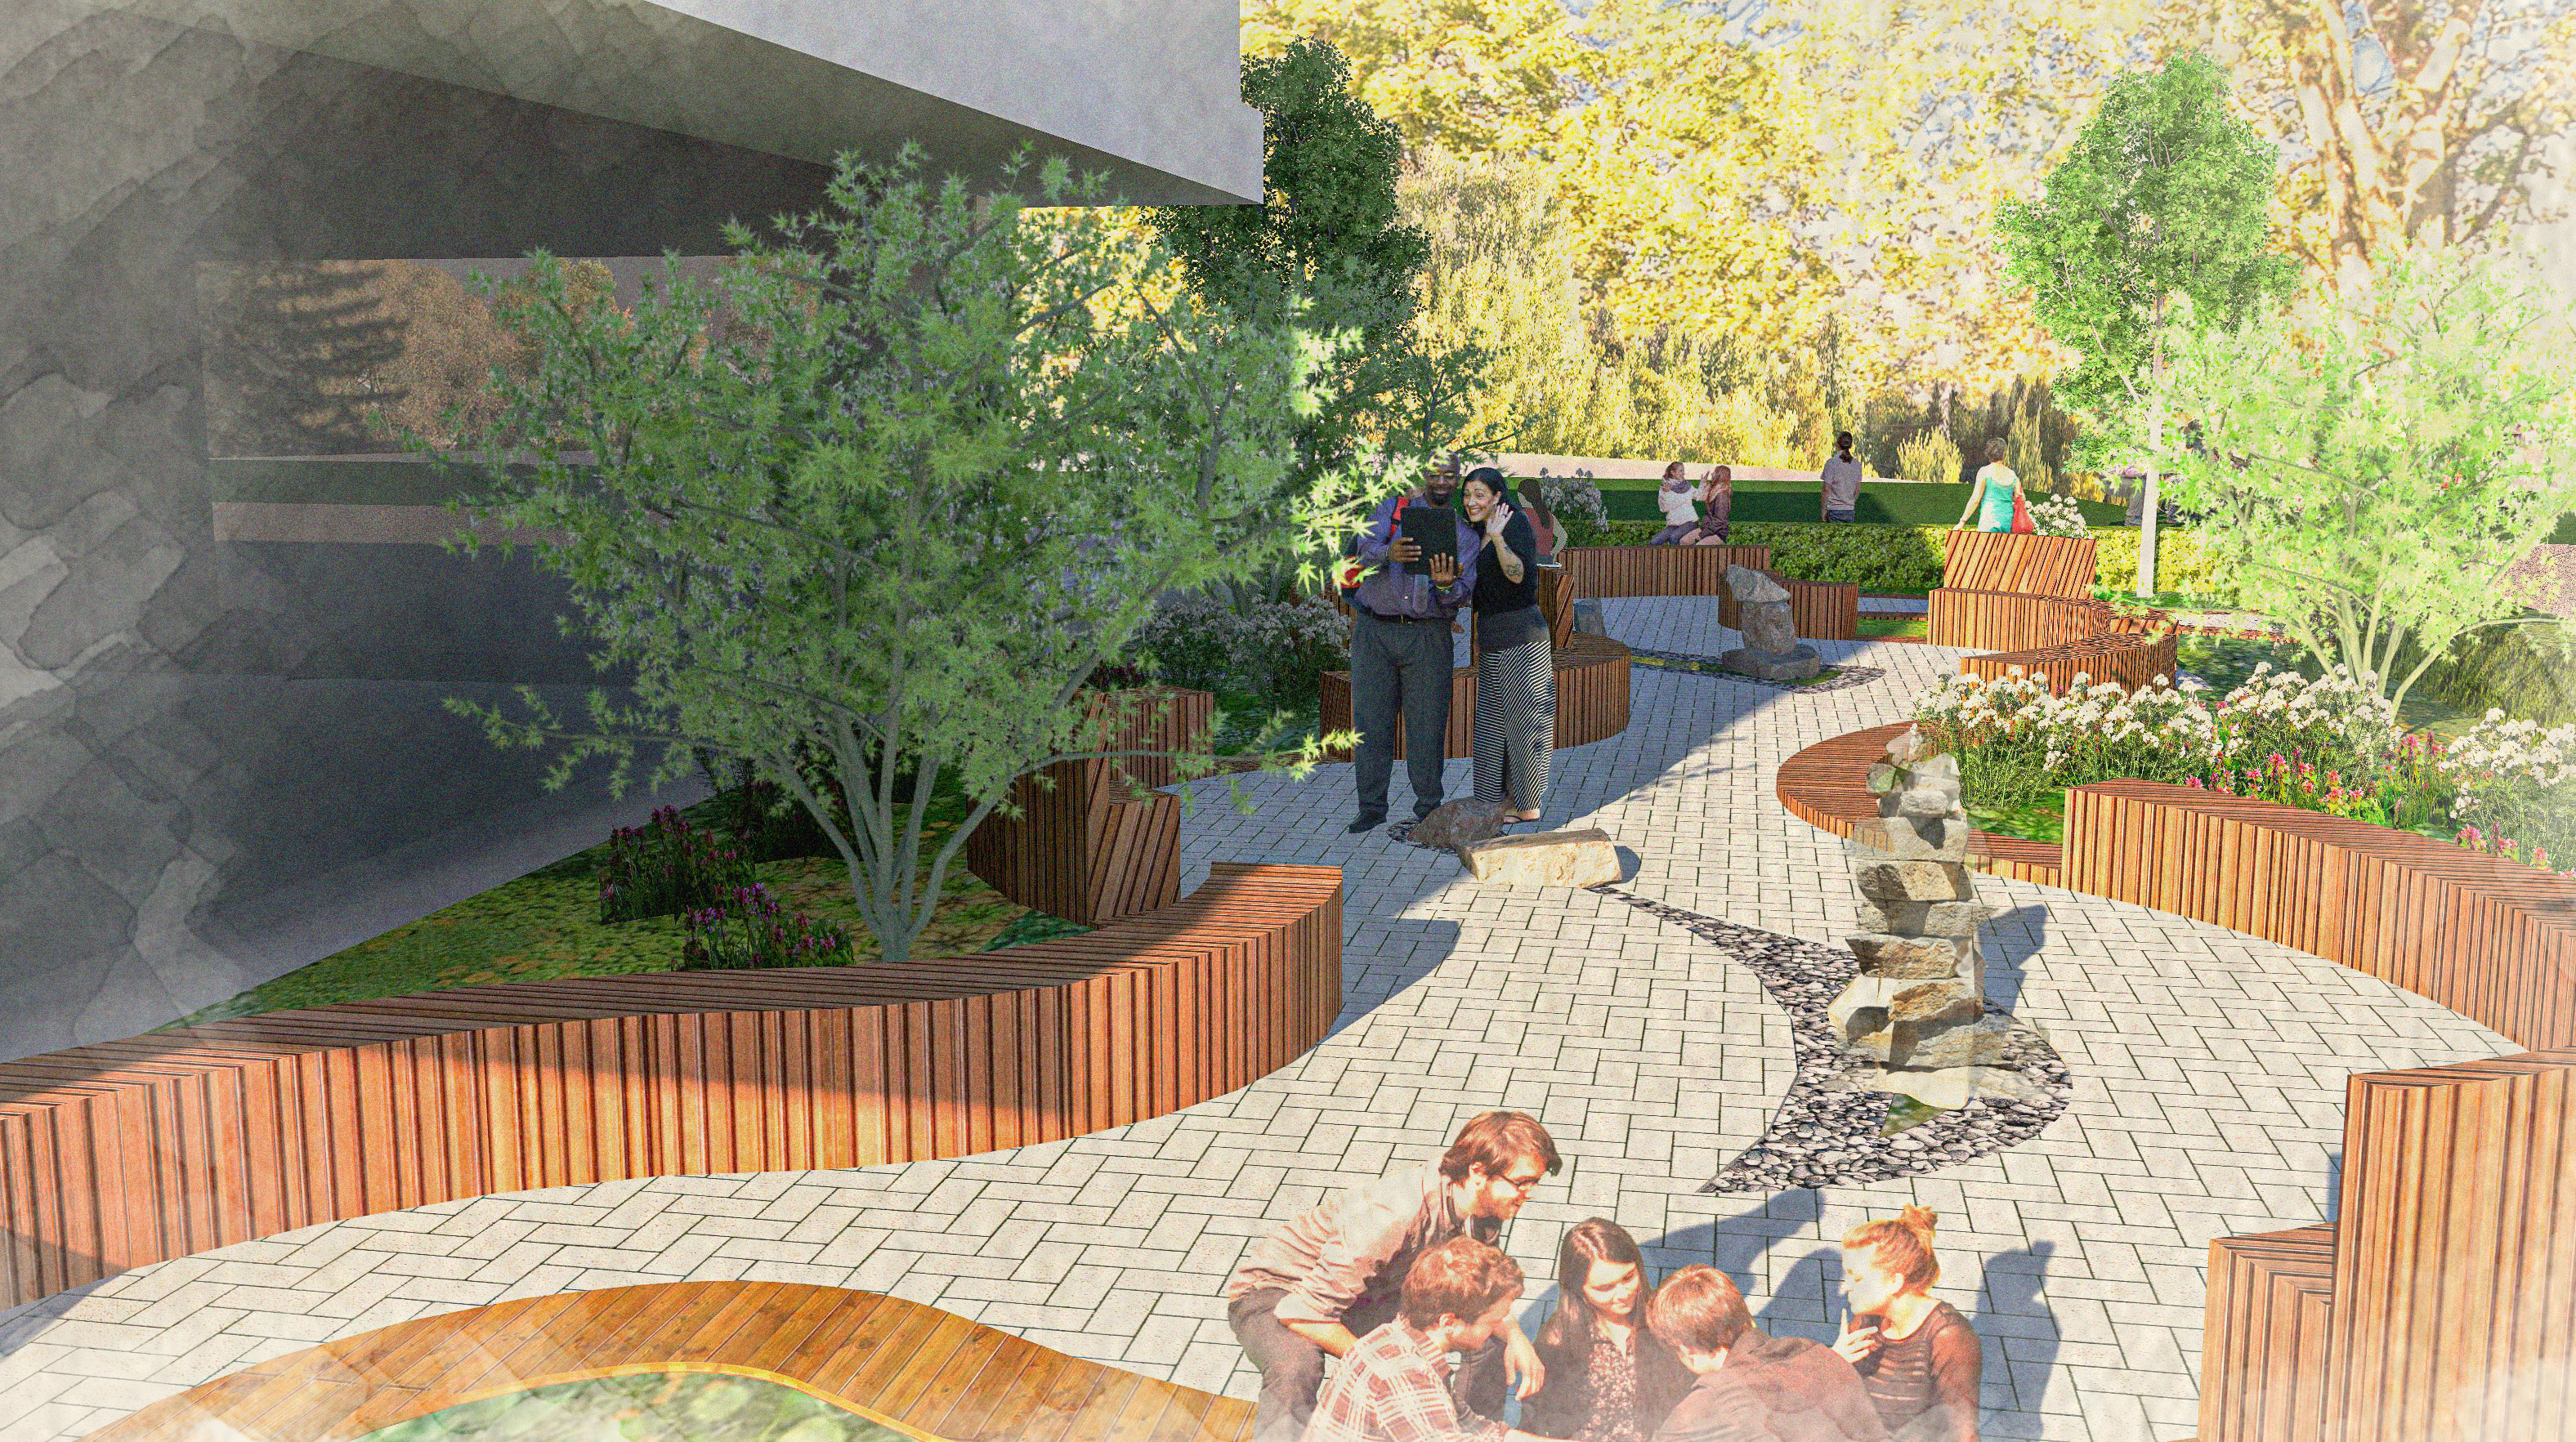 Artists rendering of Healing Garden from heightened perspective showing 'S' shaped walkway of brick and an inlayed dolphin shape with wood benches.